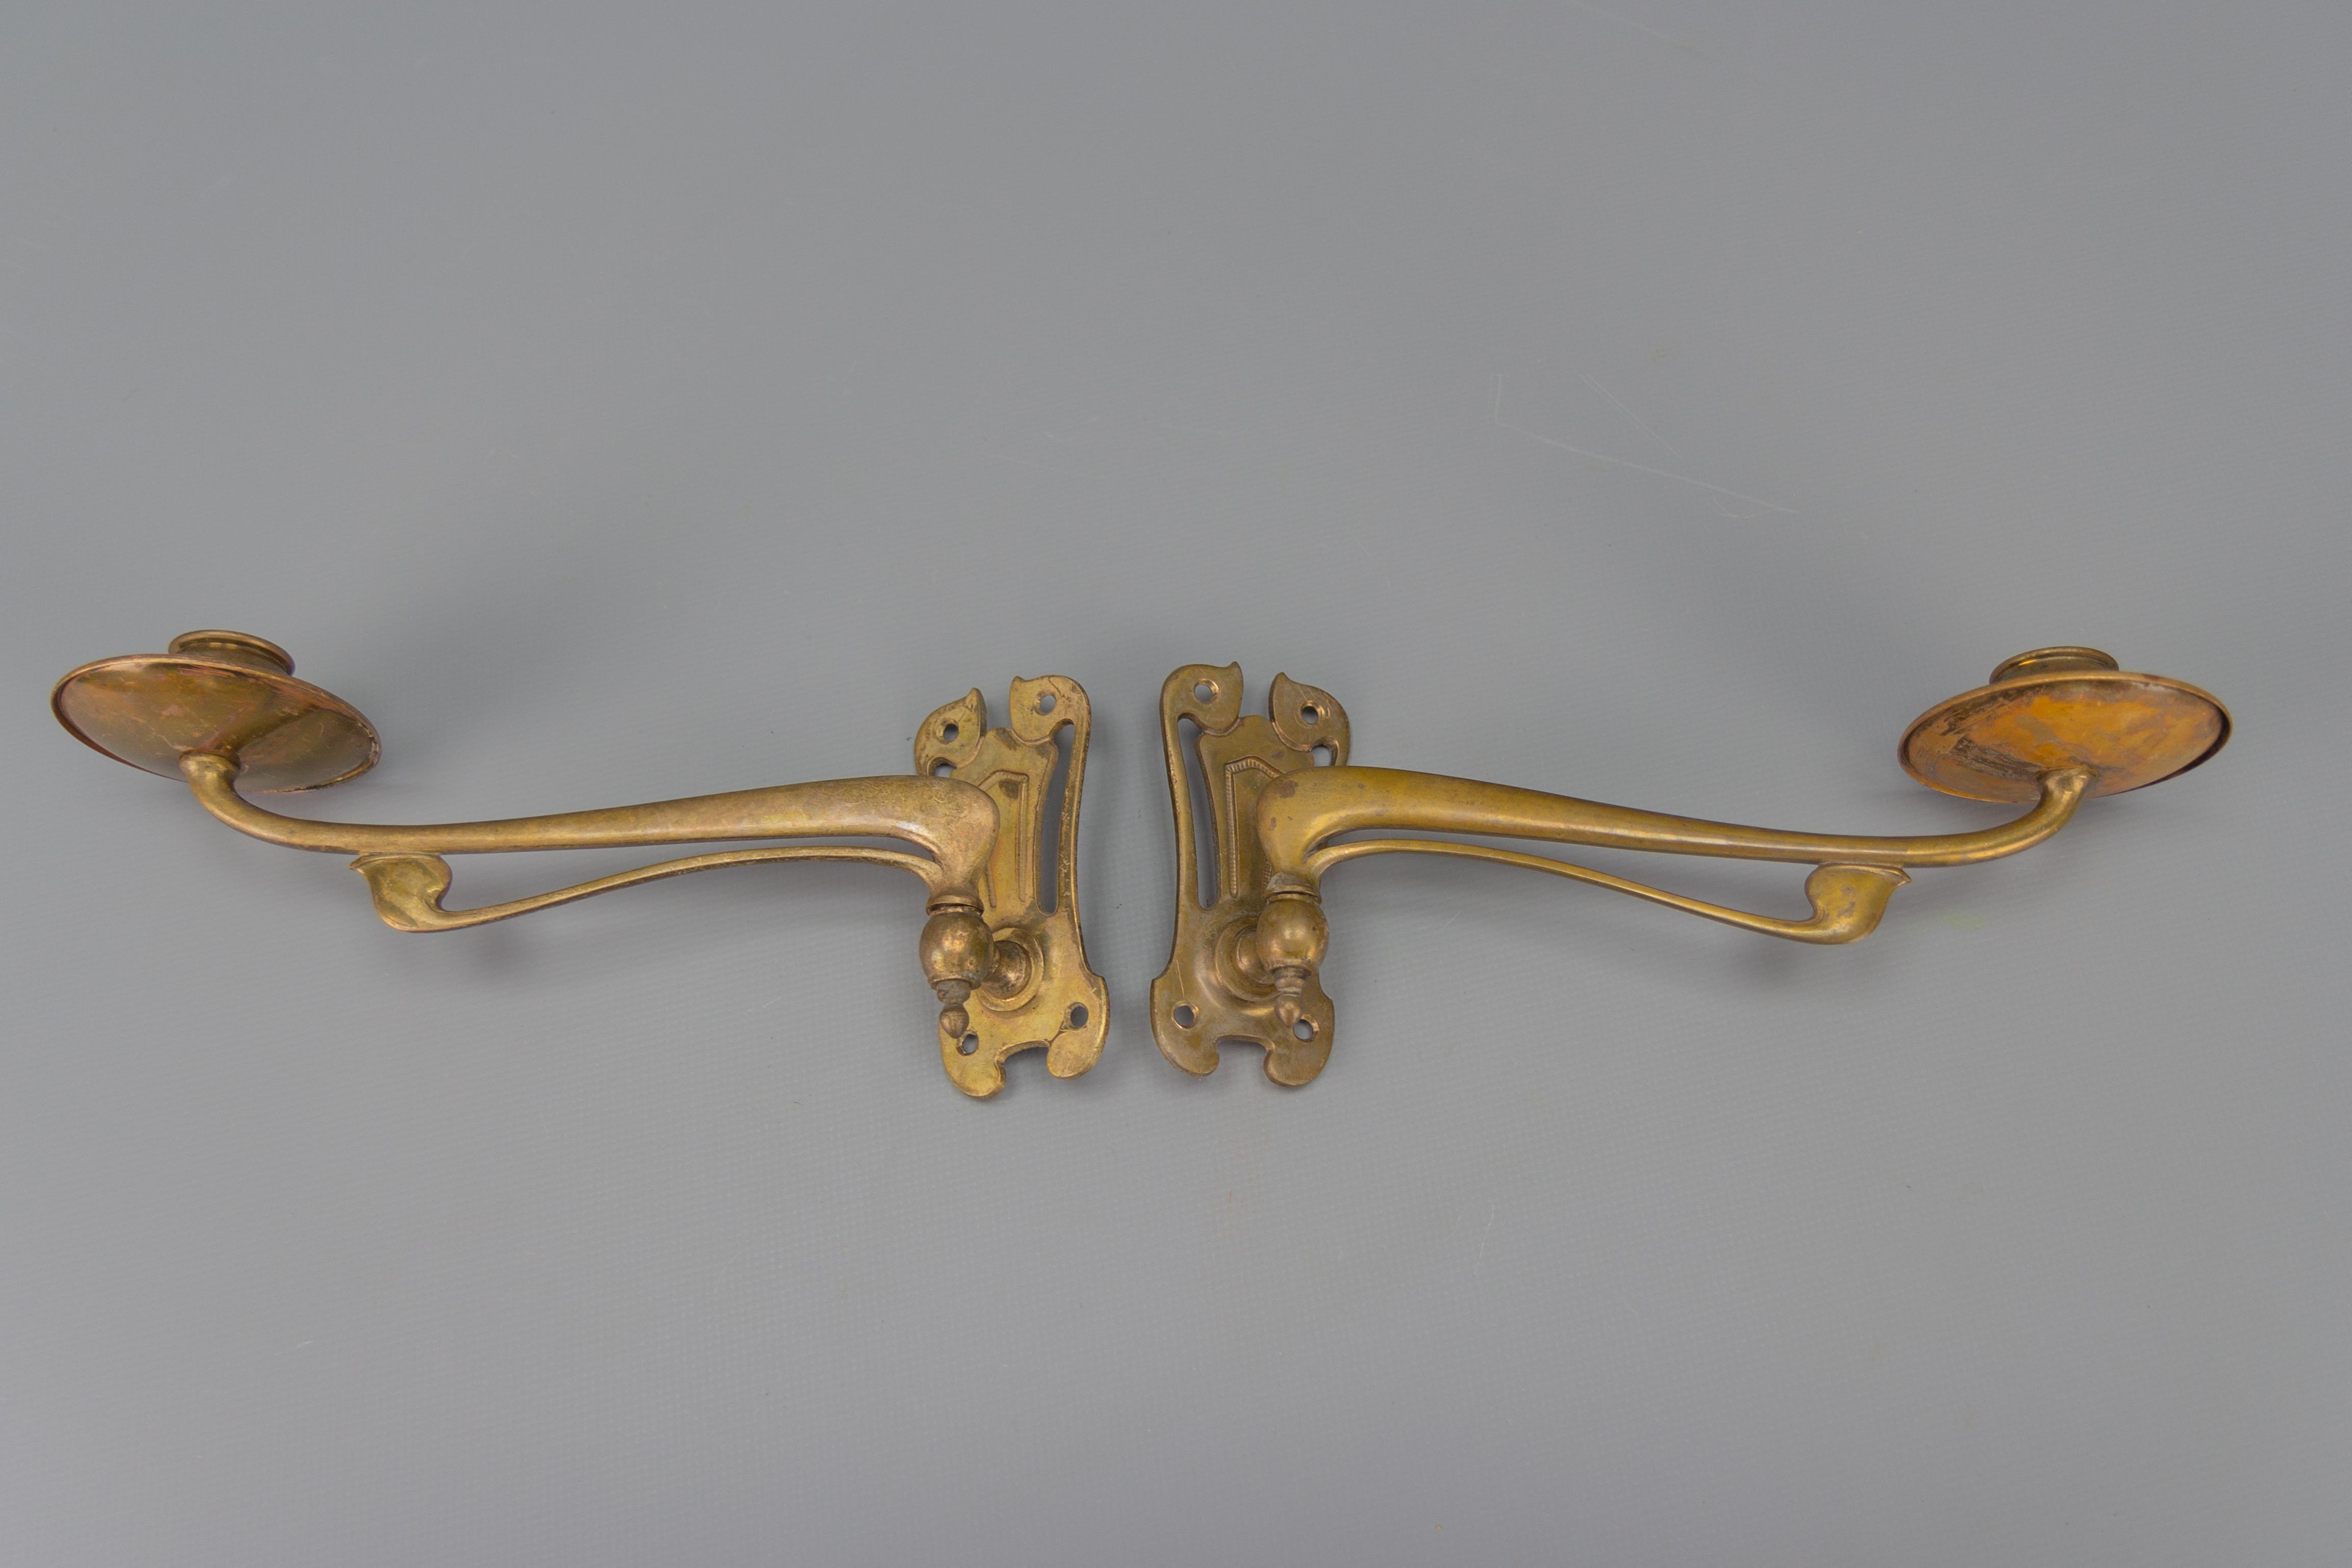 An elegant and beautiful pair of French Art Nouveau brass piano or wall sconces, swivel candleholders from circa 1920. 
Each sconce has one arm for one candle, shaped in adorable Art Nouveau-style lines. 
Dimensions: height 10 cm / 3.93 in; width 7